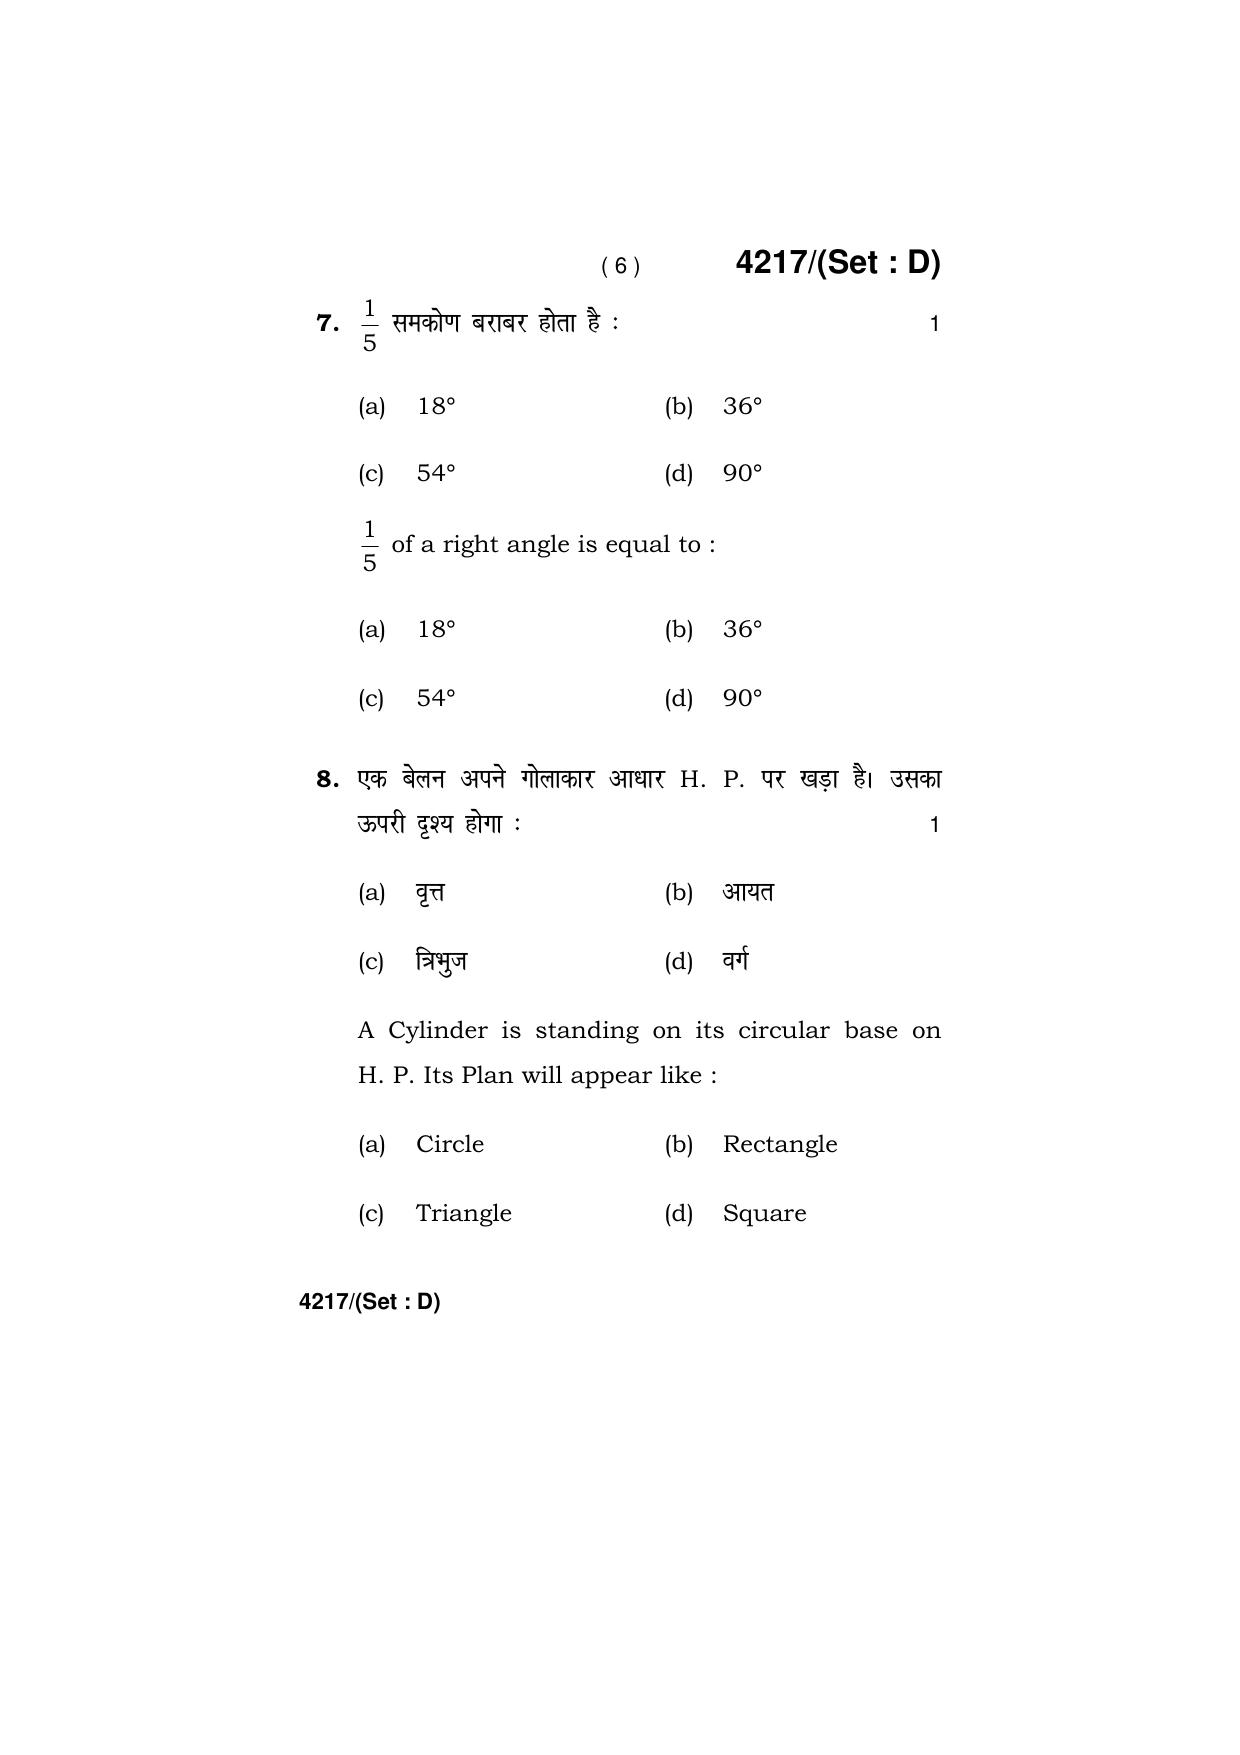 Haryana Board HBSE Class 10 Drawing (All Set) 2019 Question Paper - Page 30